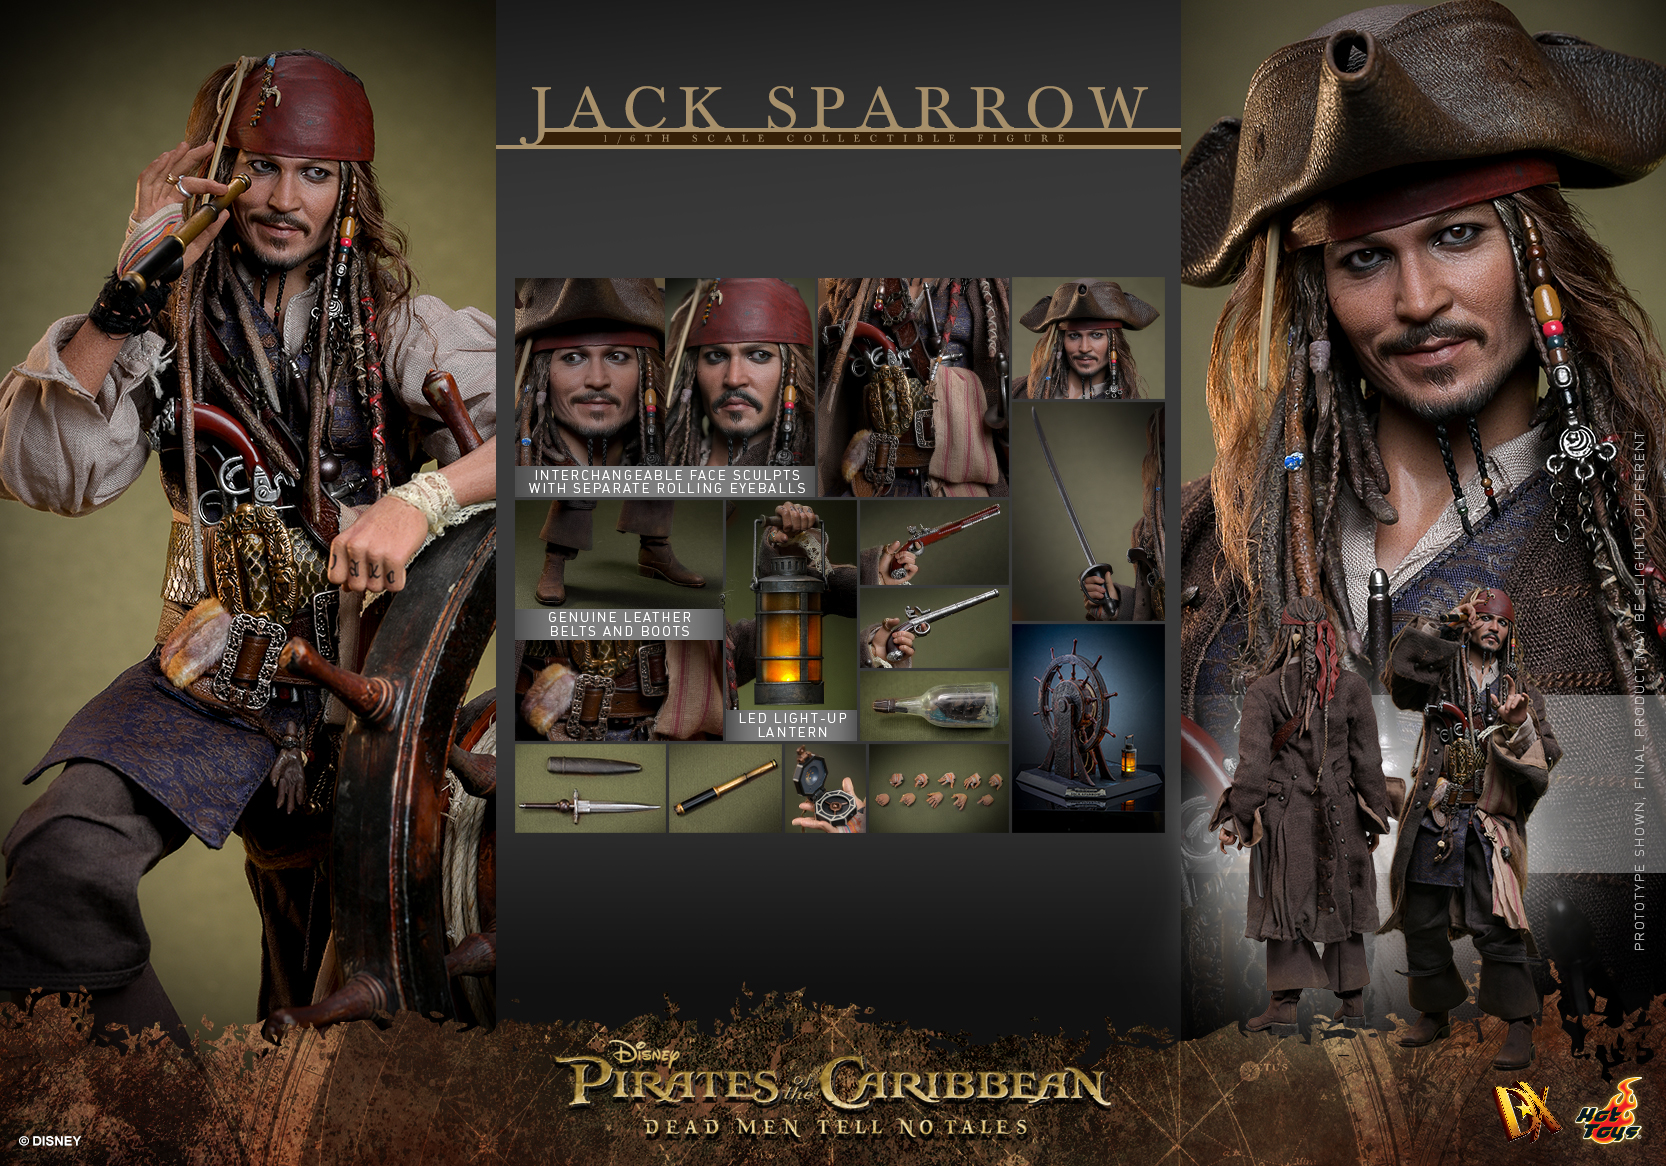 HOT TOYS DX37/ DX38 PIRATES OF THE CARIBBEAN: DEAD MEN TELL NO TALES JACK SPARROW 1/6TH SCALE COLLECTIBLE FIGURE